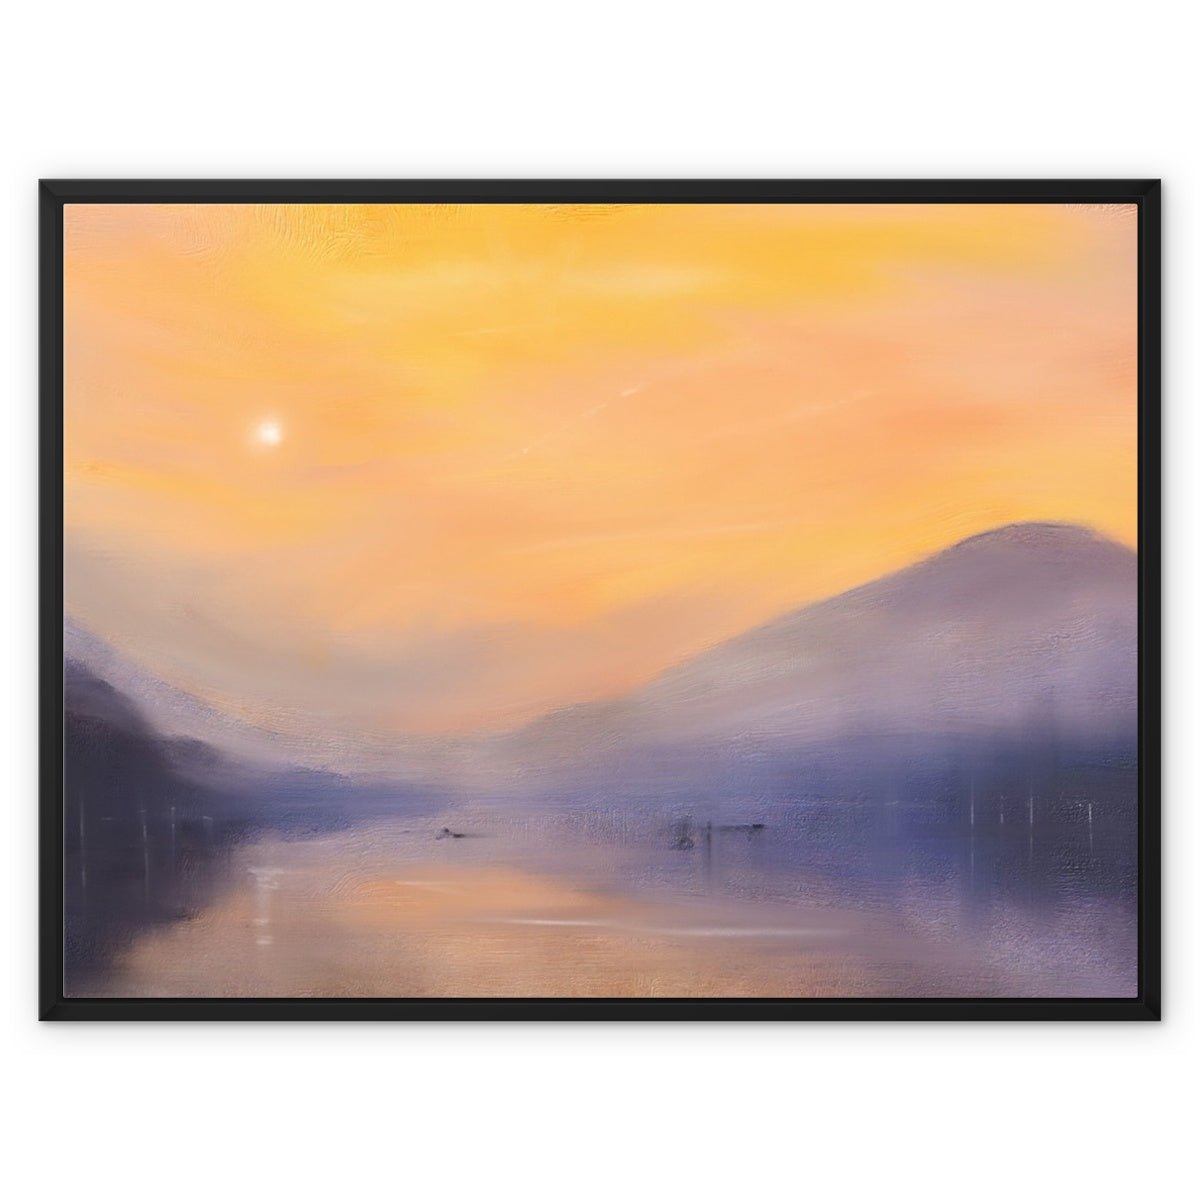 Loch Eck Dusk Painting | Framed Canvas From Scotland-Floating Framed Canvas Prints-Scottish Lochs & Mountains Art Gallery-32"x24"-Black Frame-Paintings, Prints, Homeware, Art Gifts From Scotland By Scottish Artist Kevin Hunter